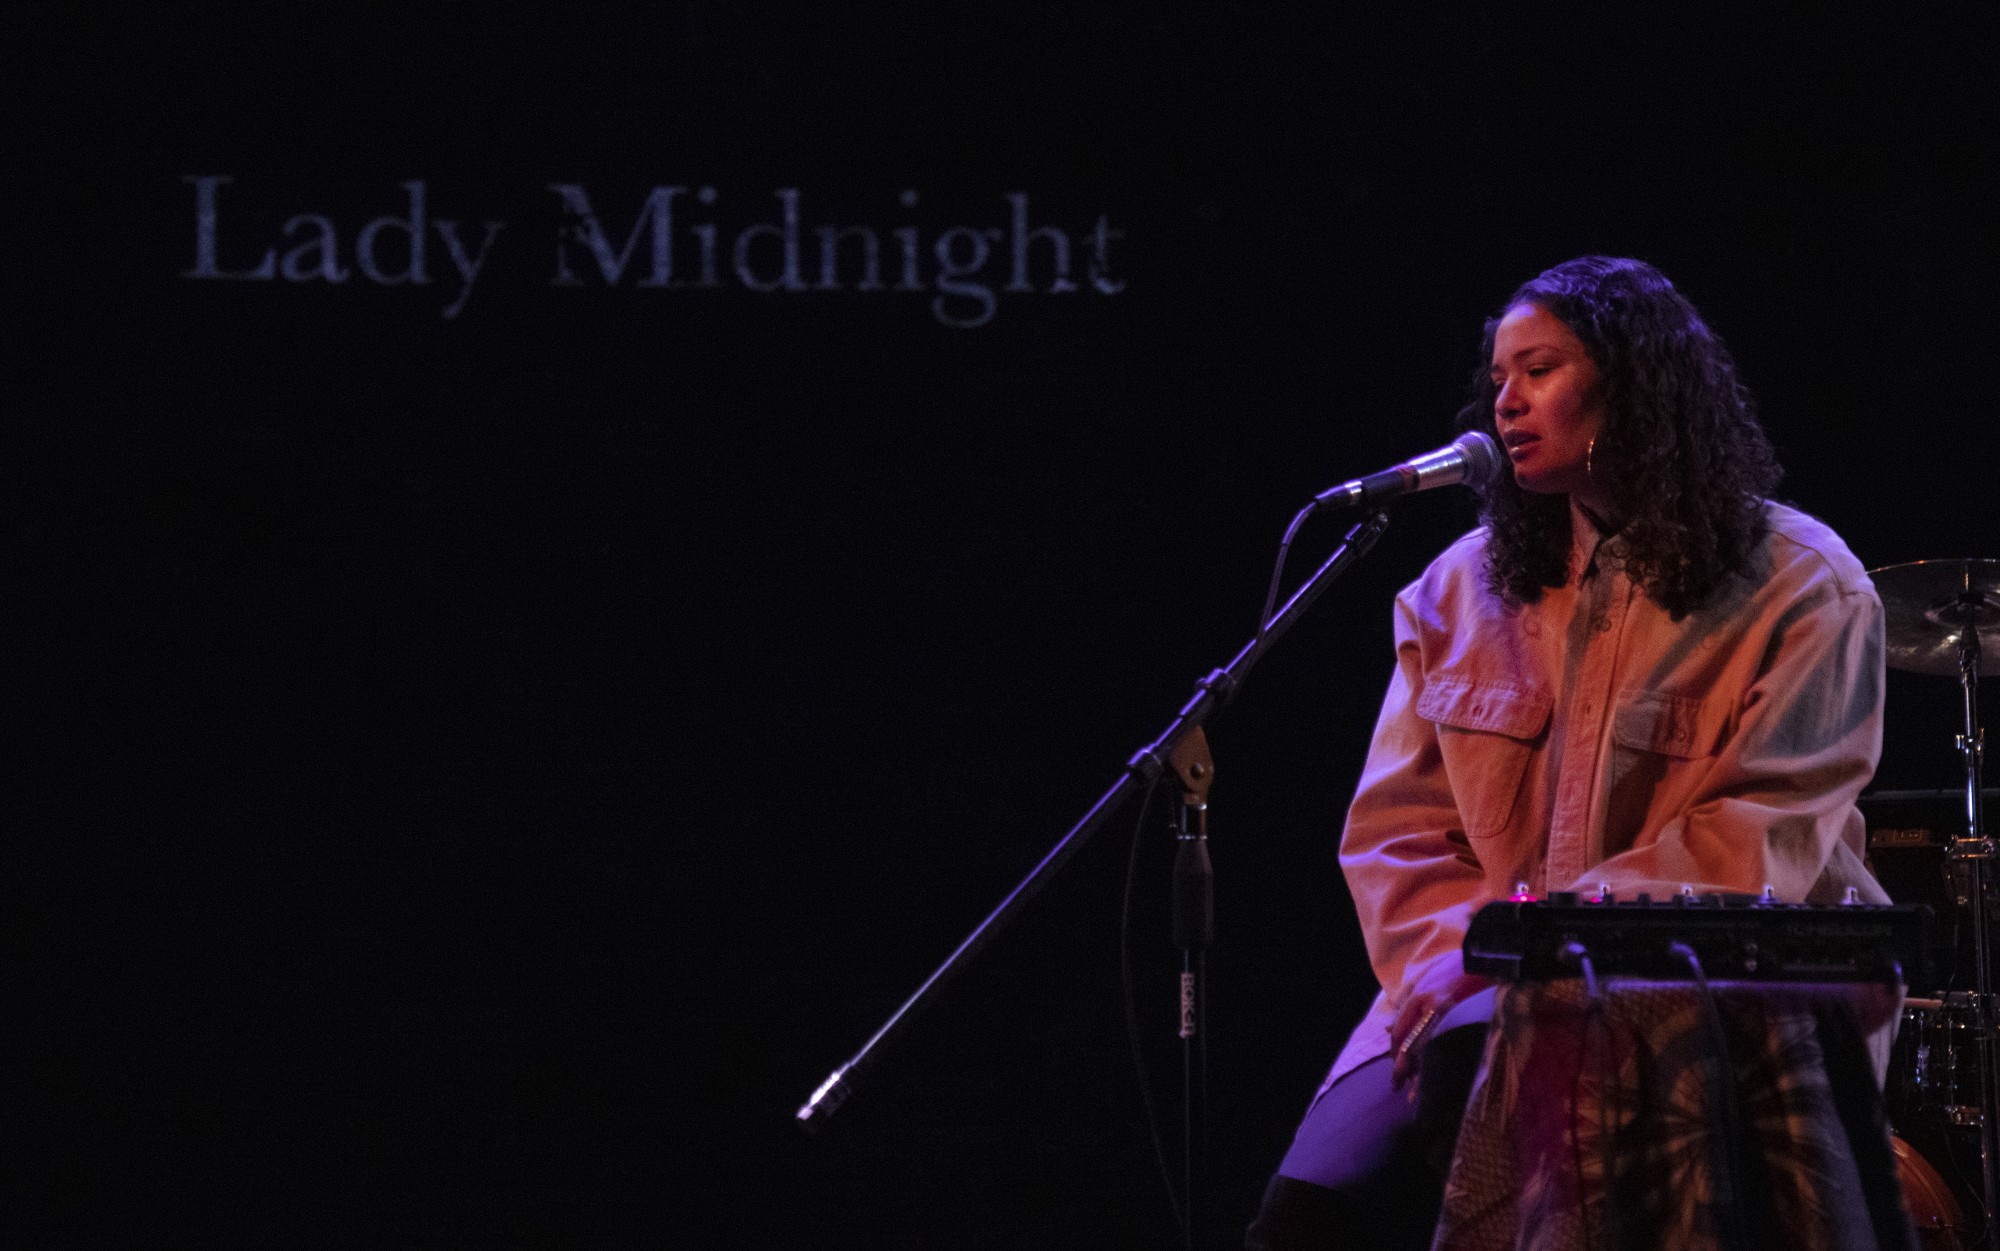 Lady Midnight performs in Work in Progress at The Southern Theater on Saturday, Feb. 8. The songs complemented the poets’ and writers’ themes of introspection, mental health, and the creative process. 